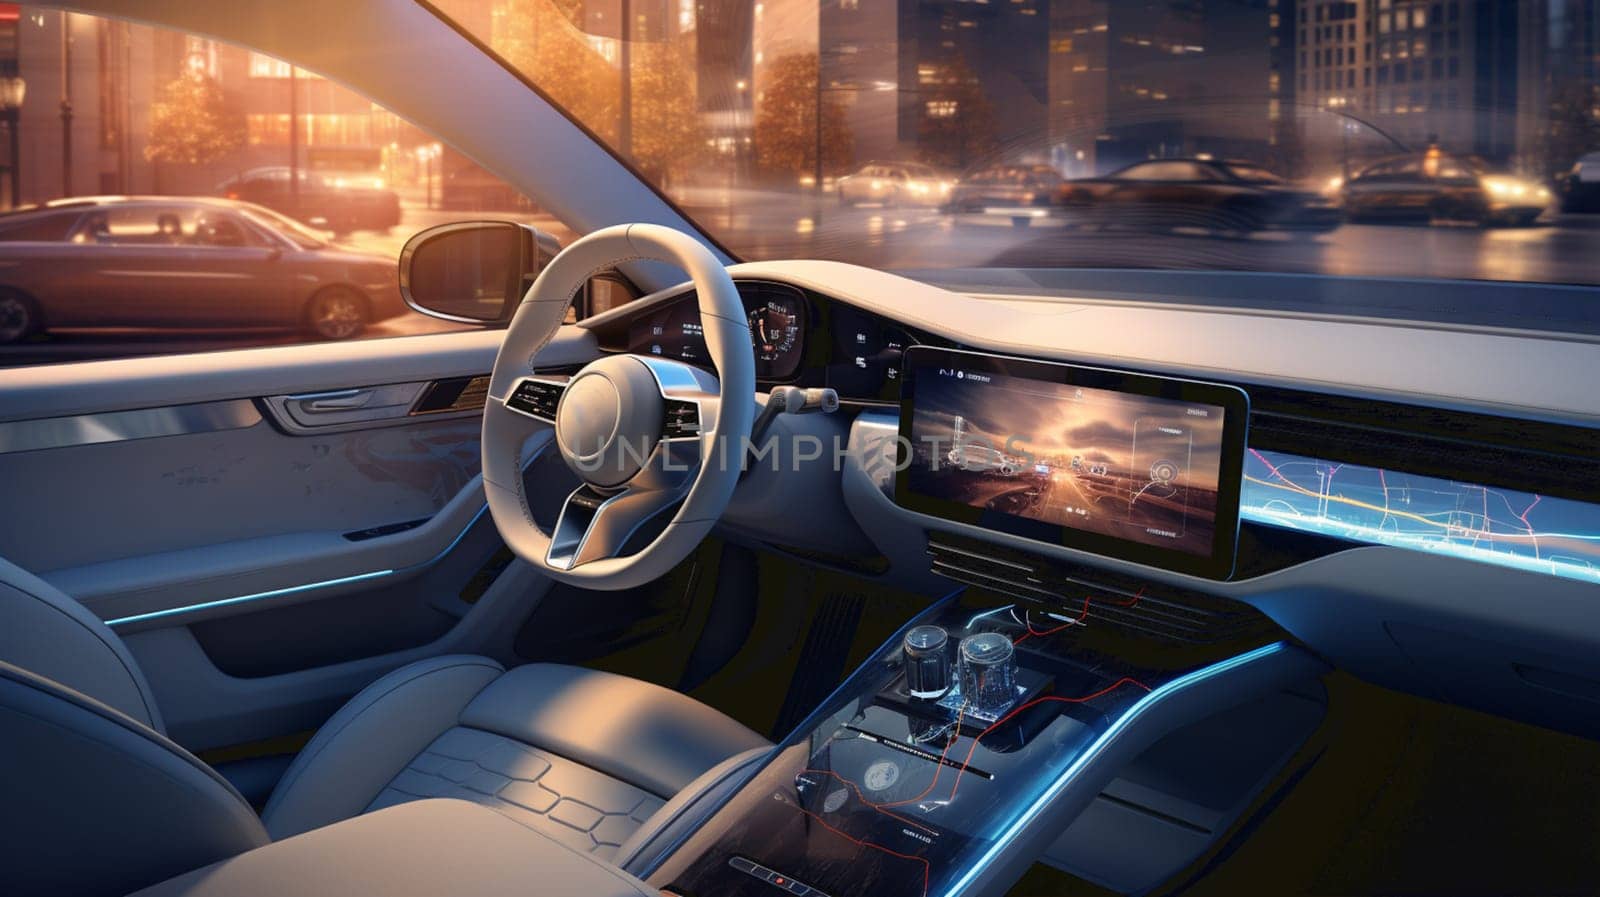 Car interior with Self driving , Auto pilot and internet of thin futuristic icon illustration . Autonomous car system technology concept . by Andelov13